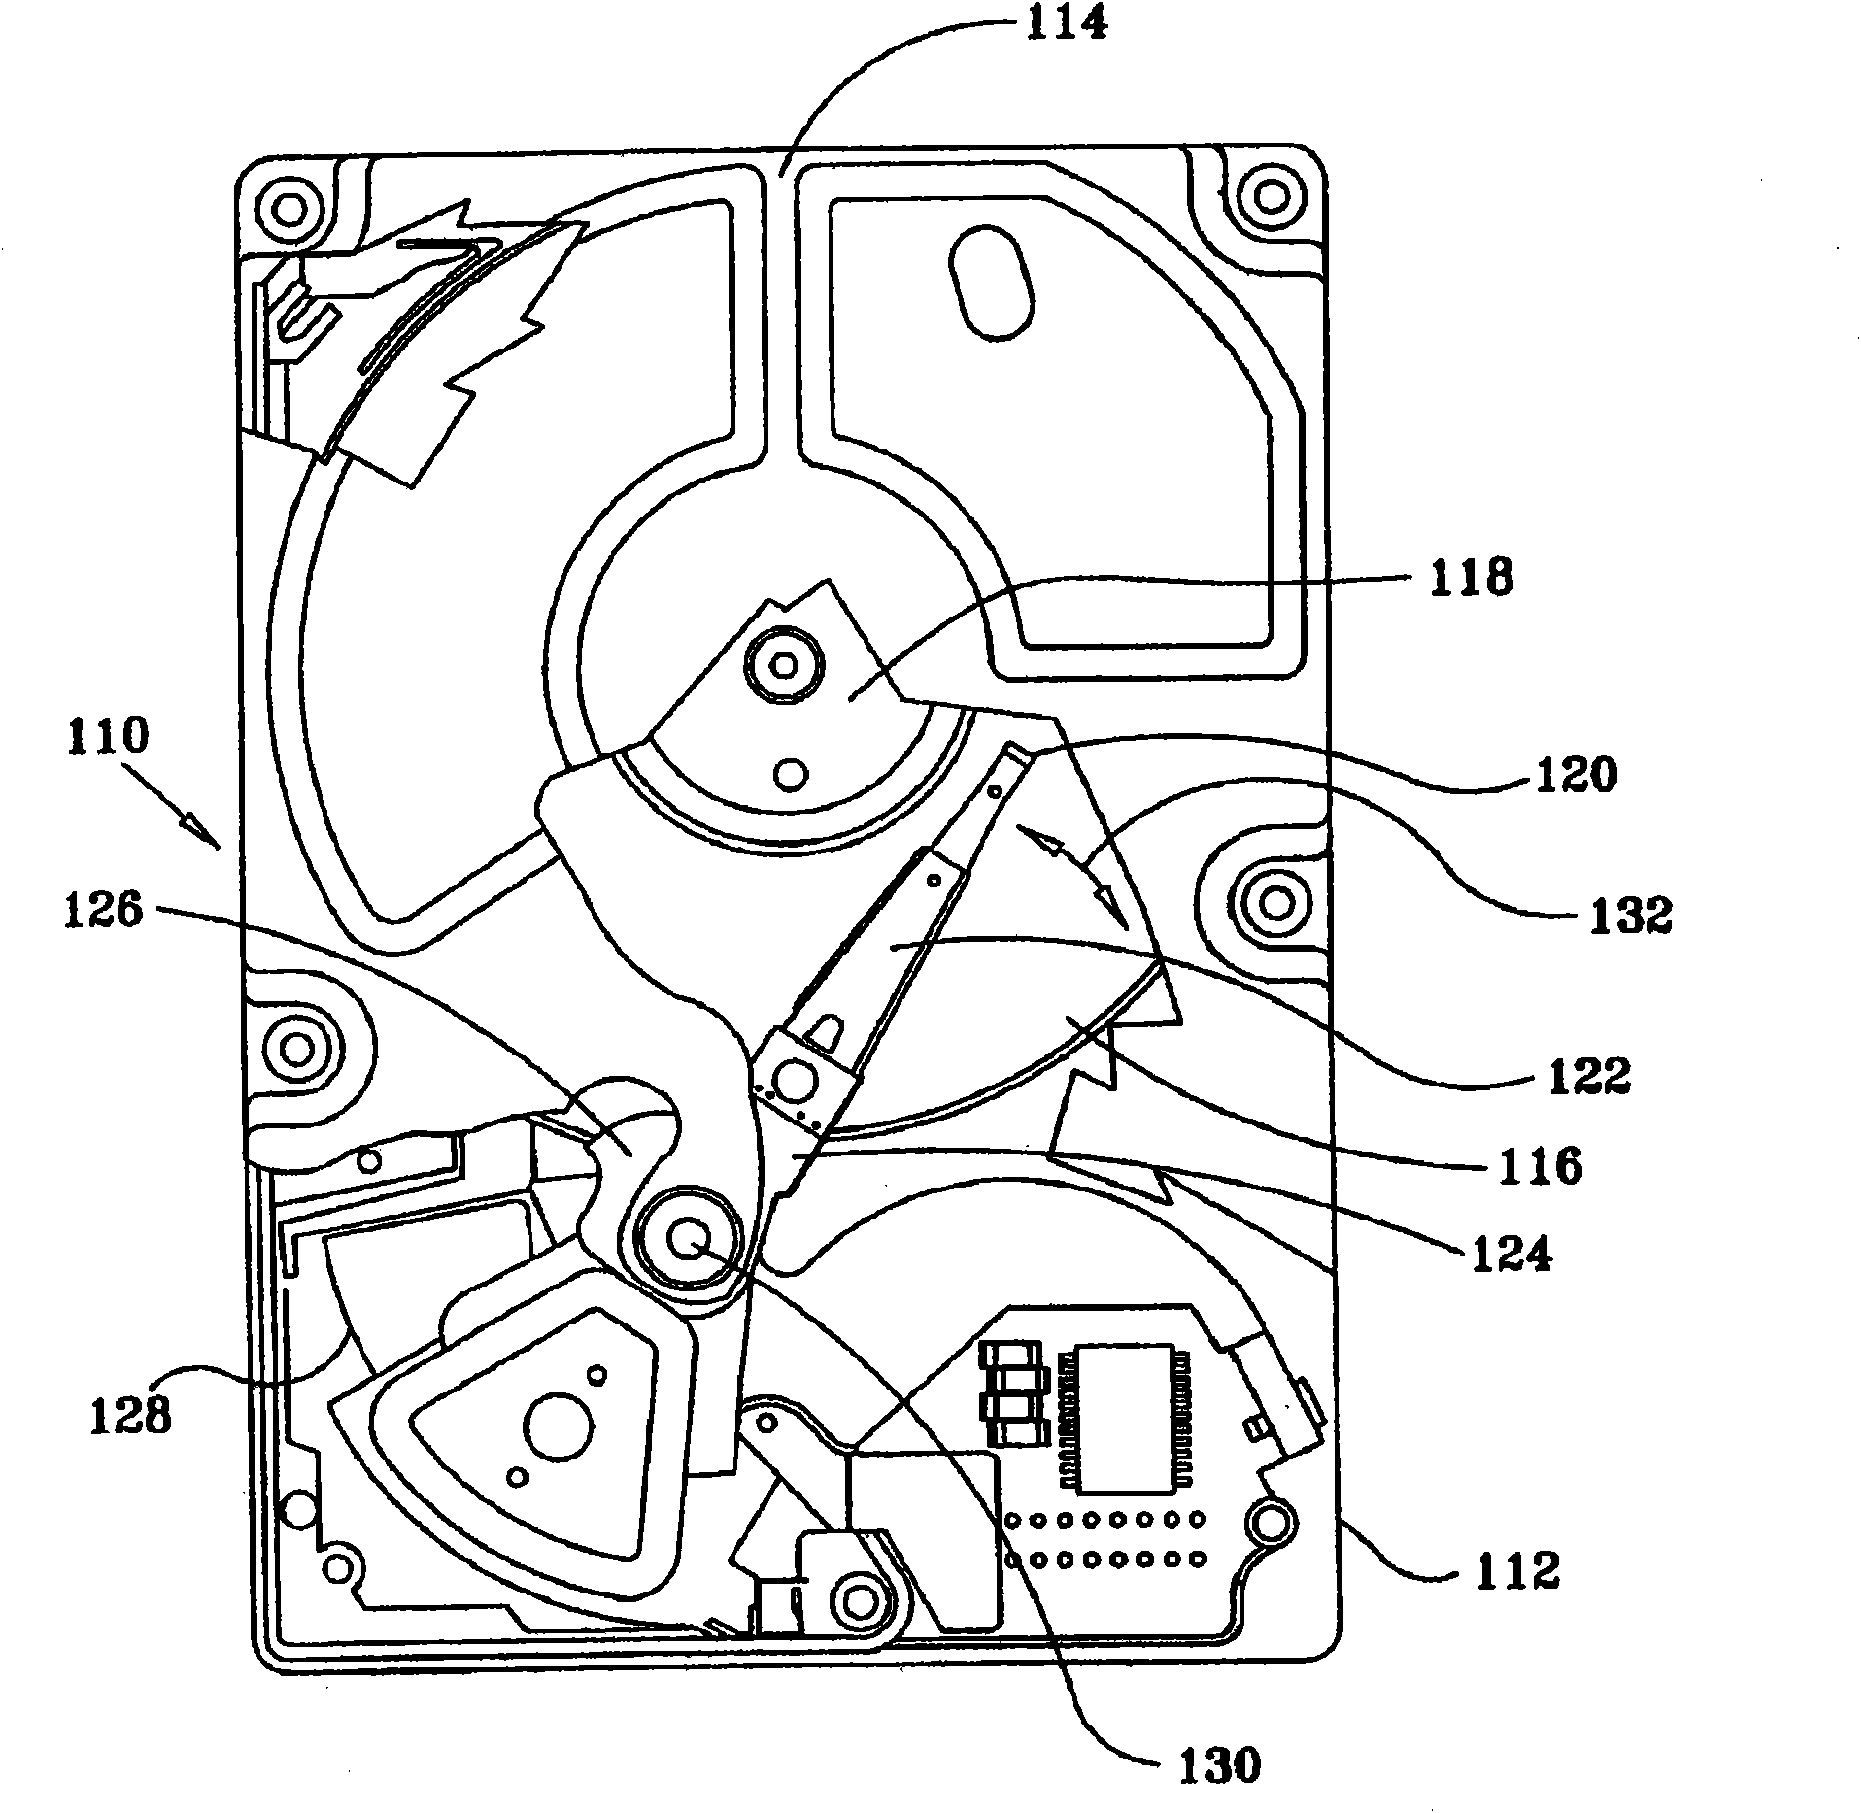 Fluid dynamic bearing motor for use with a range of rotational speed rated disc drive memory device products